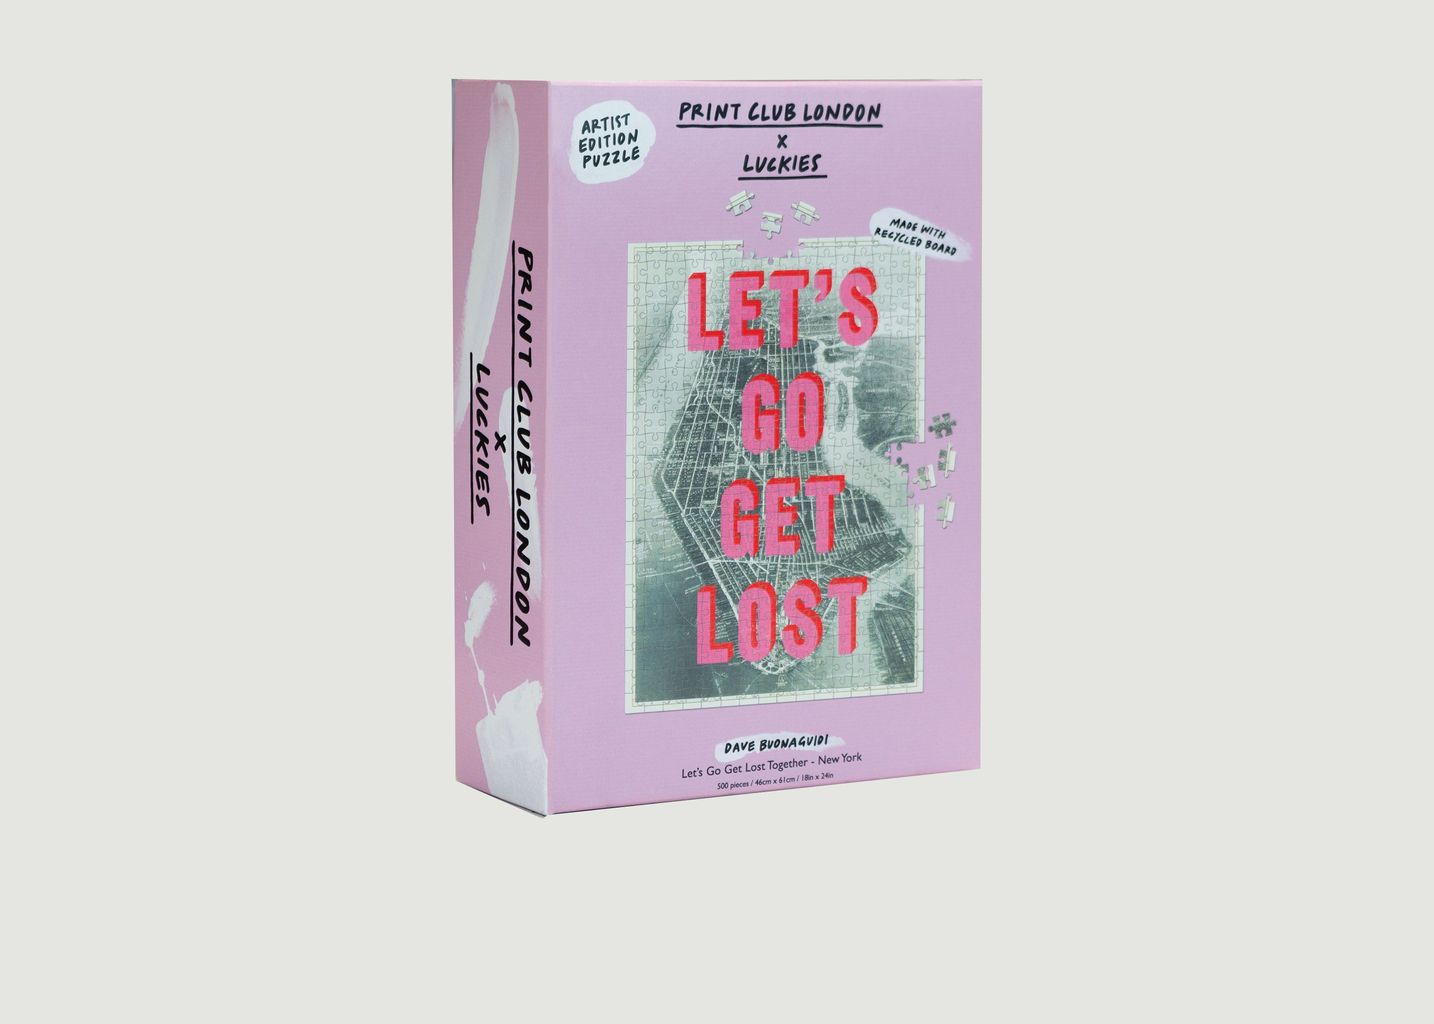 Lets Go Get Lost Together New York Puzzle - Luckies